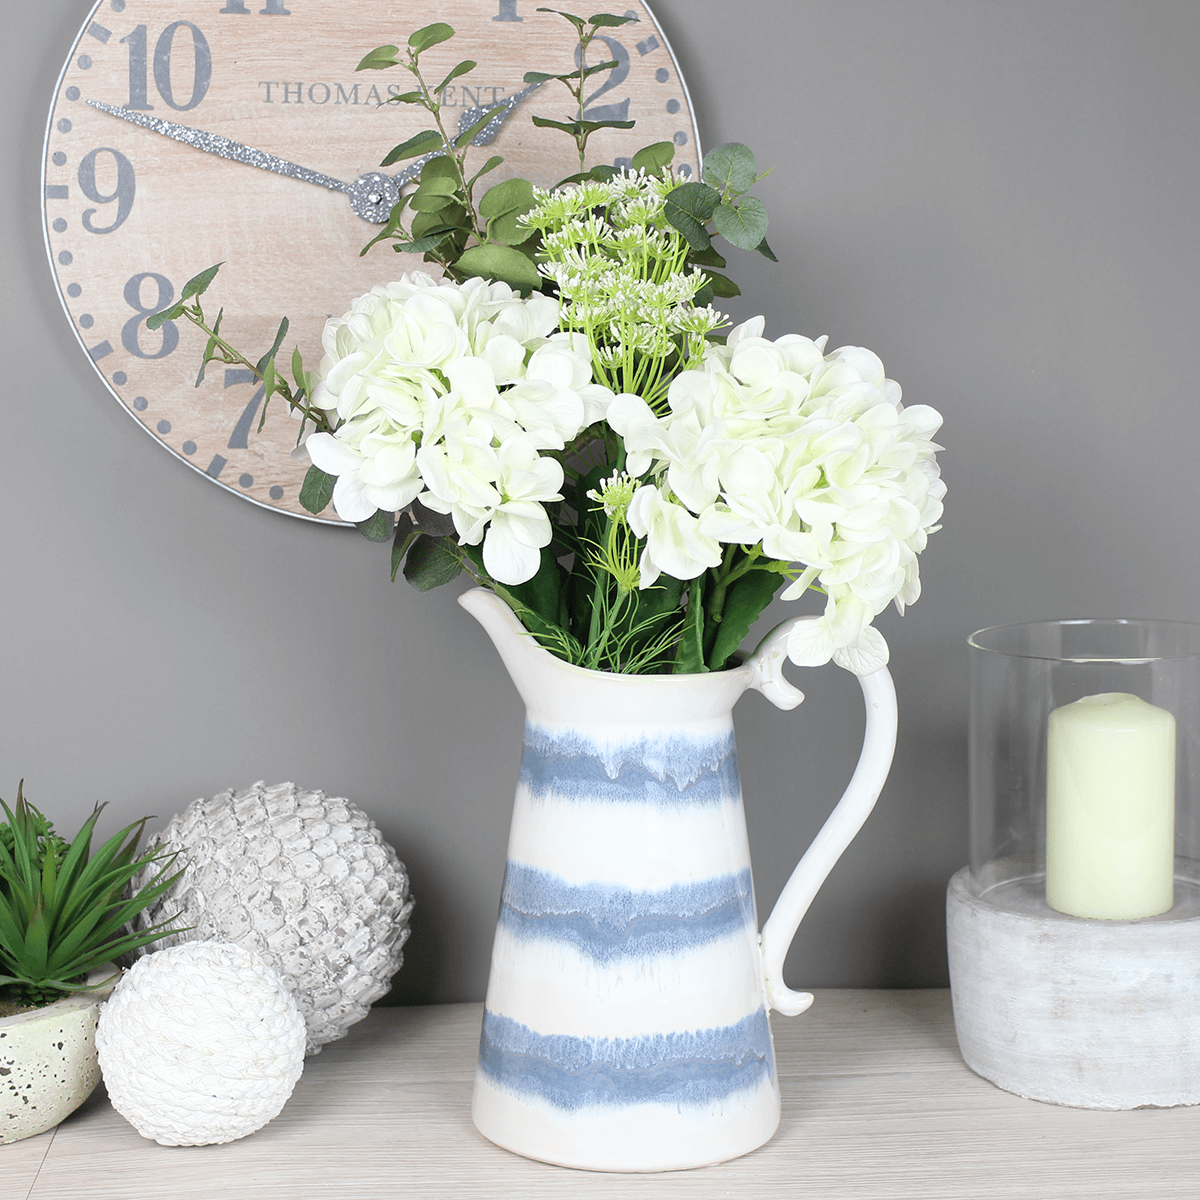 Look no further for the perfect country style jug 💜

#jug #jugs #flowerjug #floral #flowerarrangement #hydrangea #hydrangeas #artificialflowers #fauxflowers #rustic #countryjug